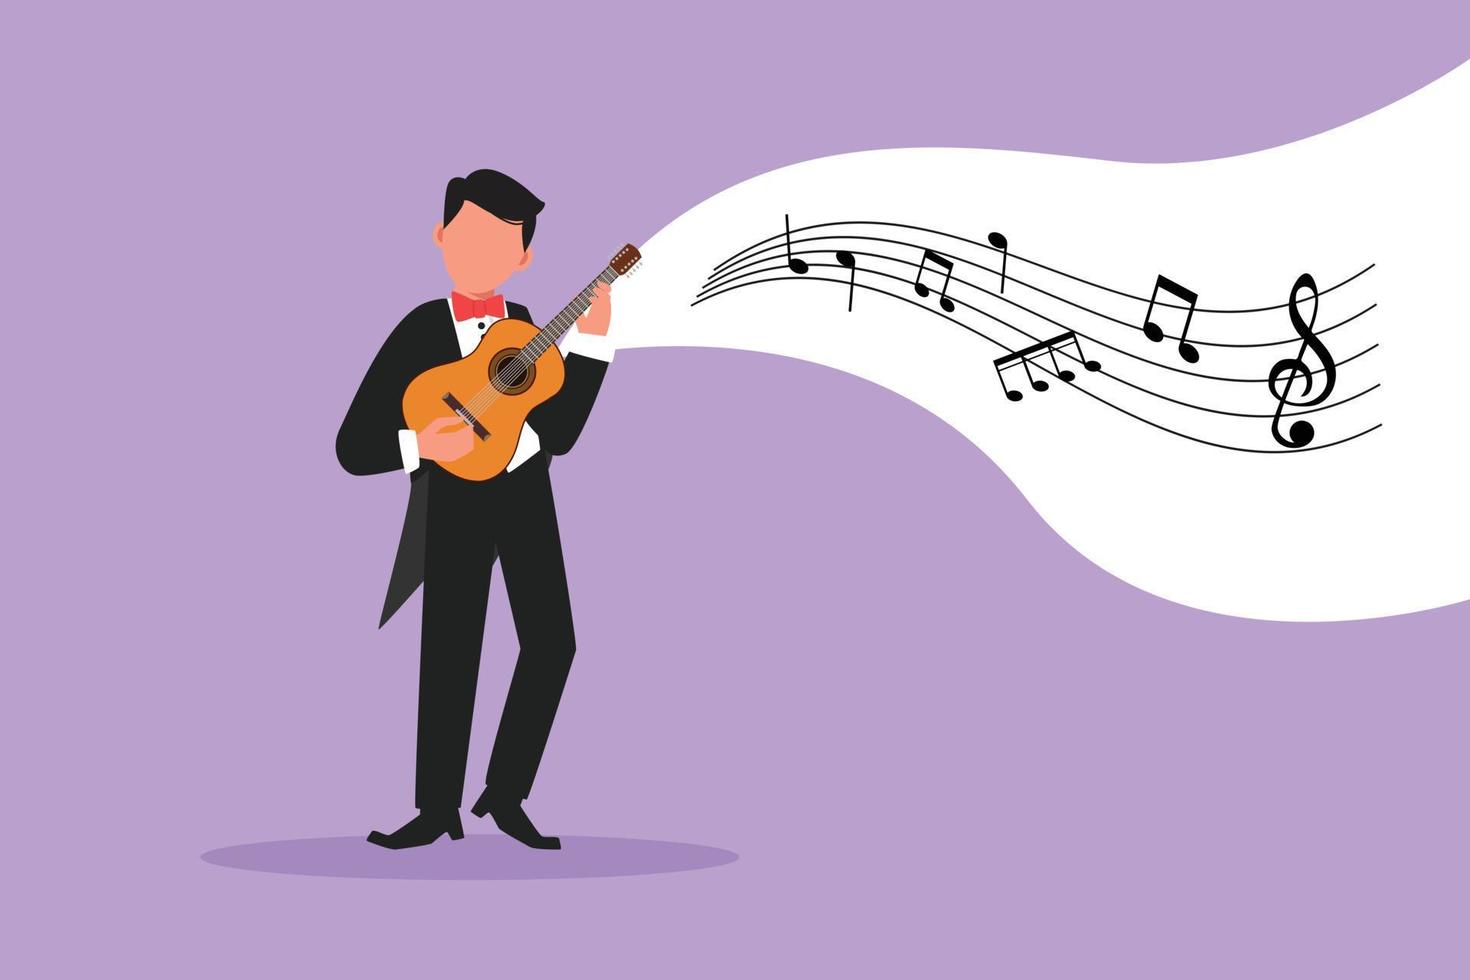 Business flat drawing joyful guy playing on ukulele and singing having fun. Male musician holding small guitar and singing. Man play on musical instrument. Cartoon character design vector illustration